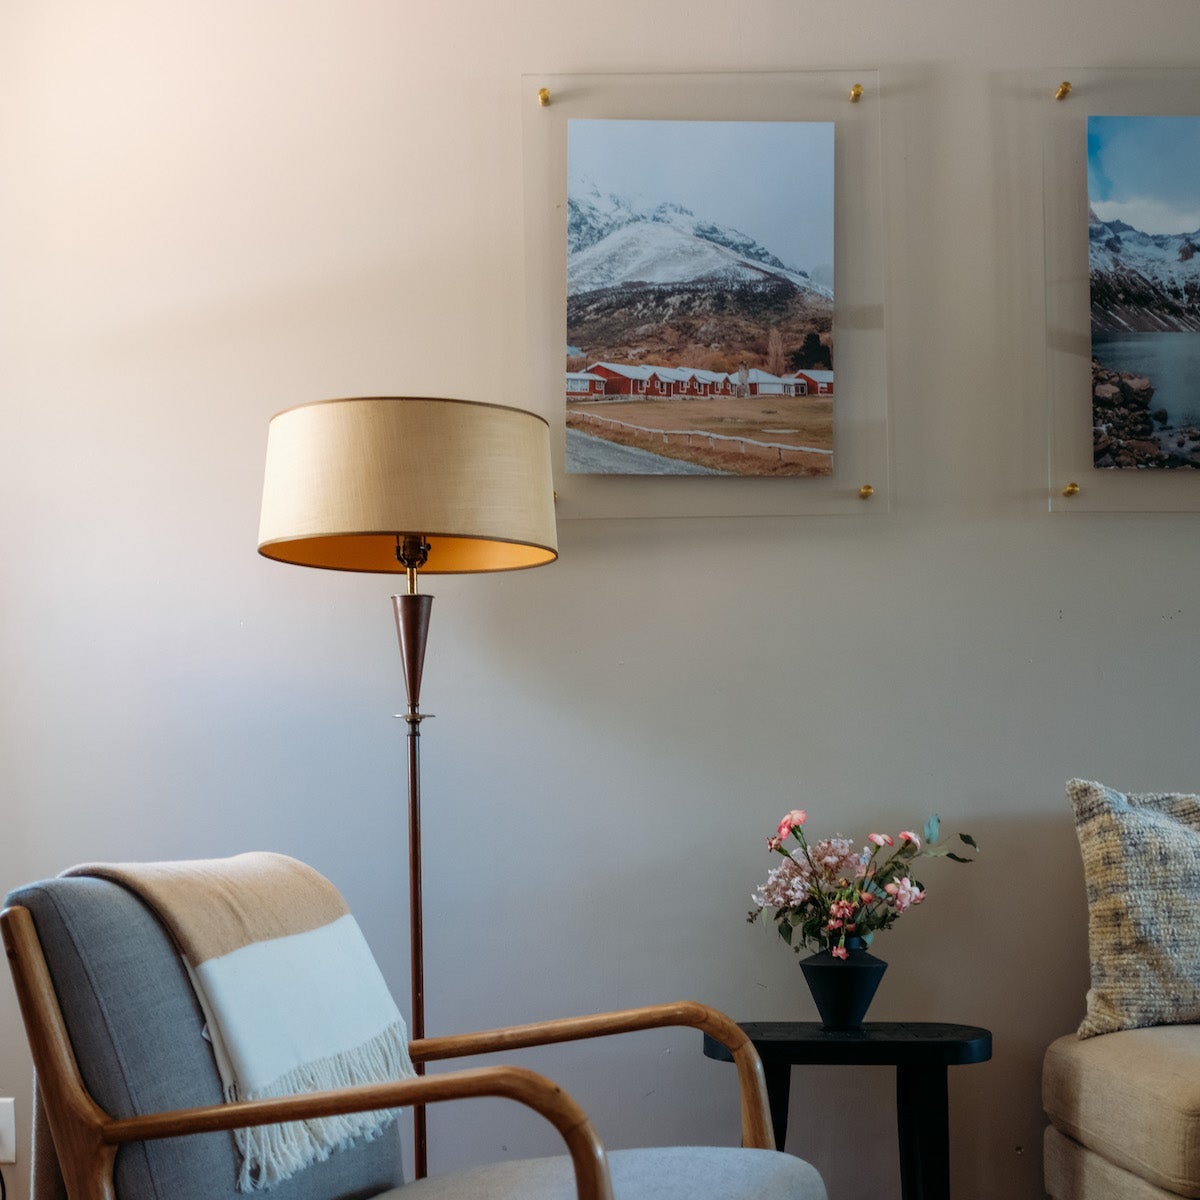 Frame with a mountain photo on the wall next to a lamp and accent chair.